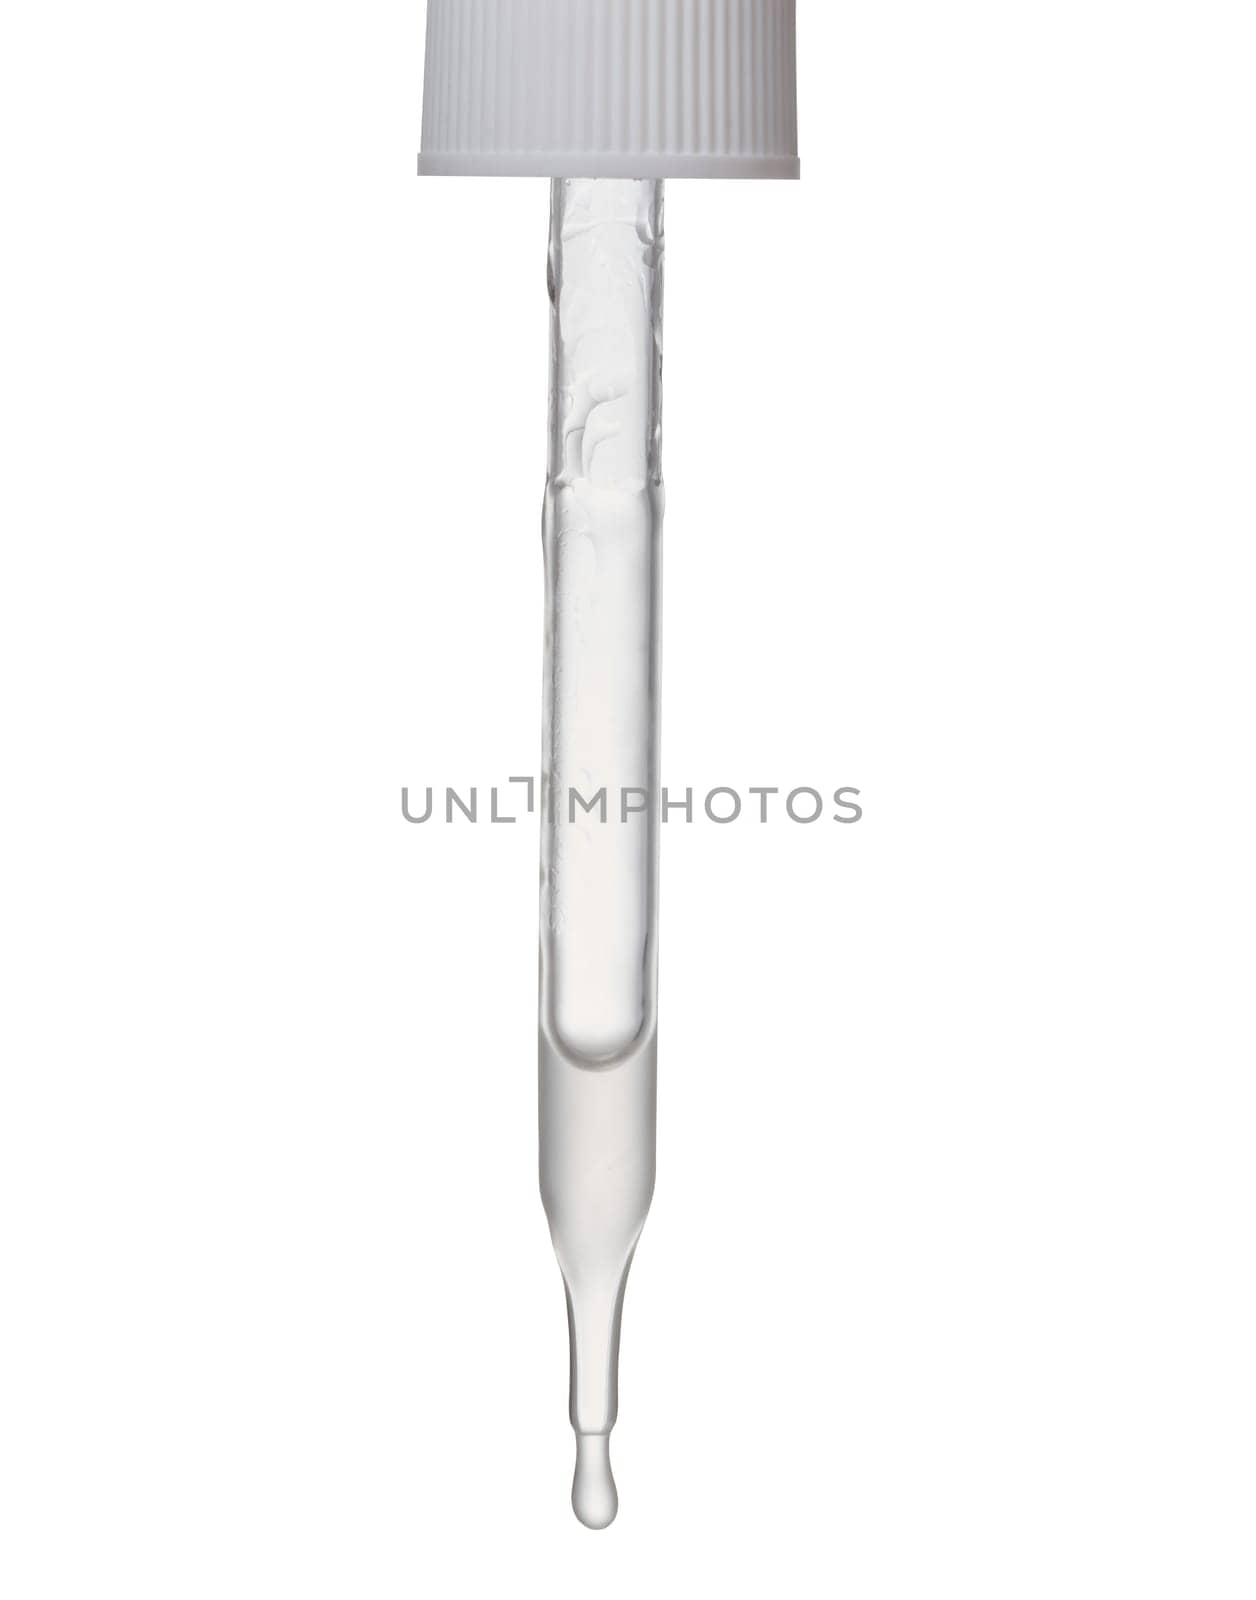 Transparent glass pipette with liquid and drop on isolated background by ndanko